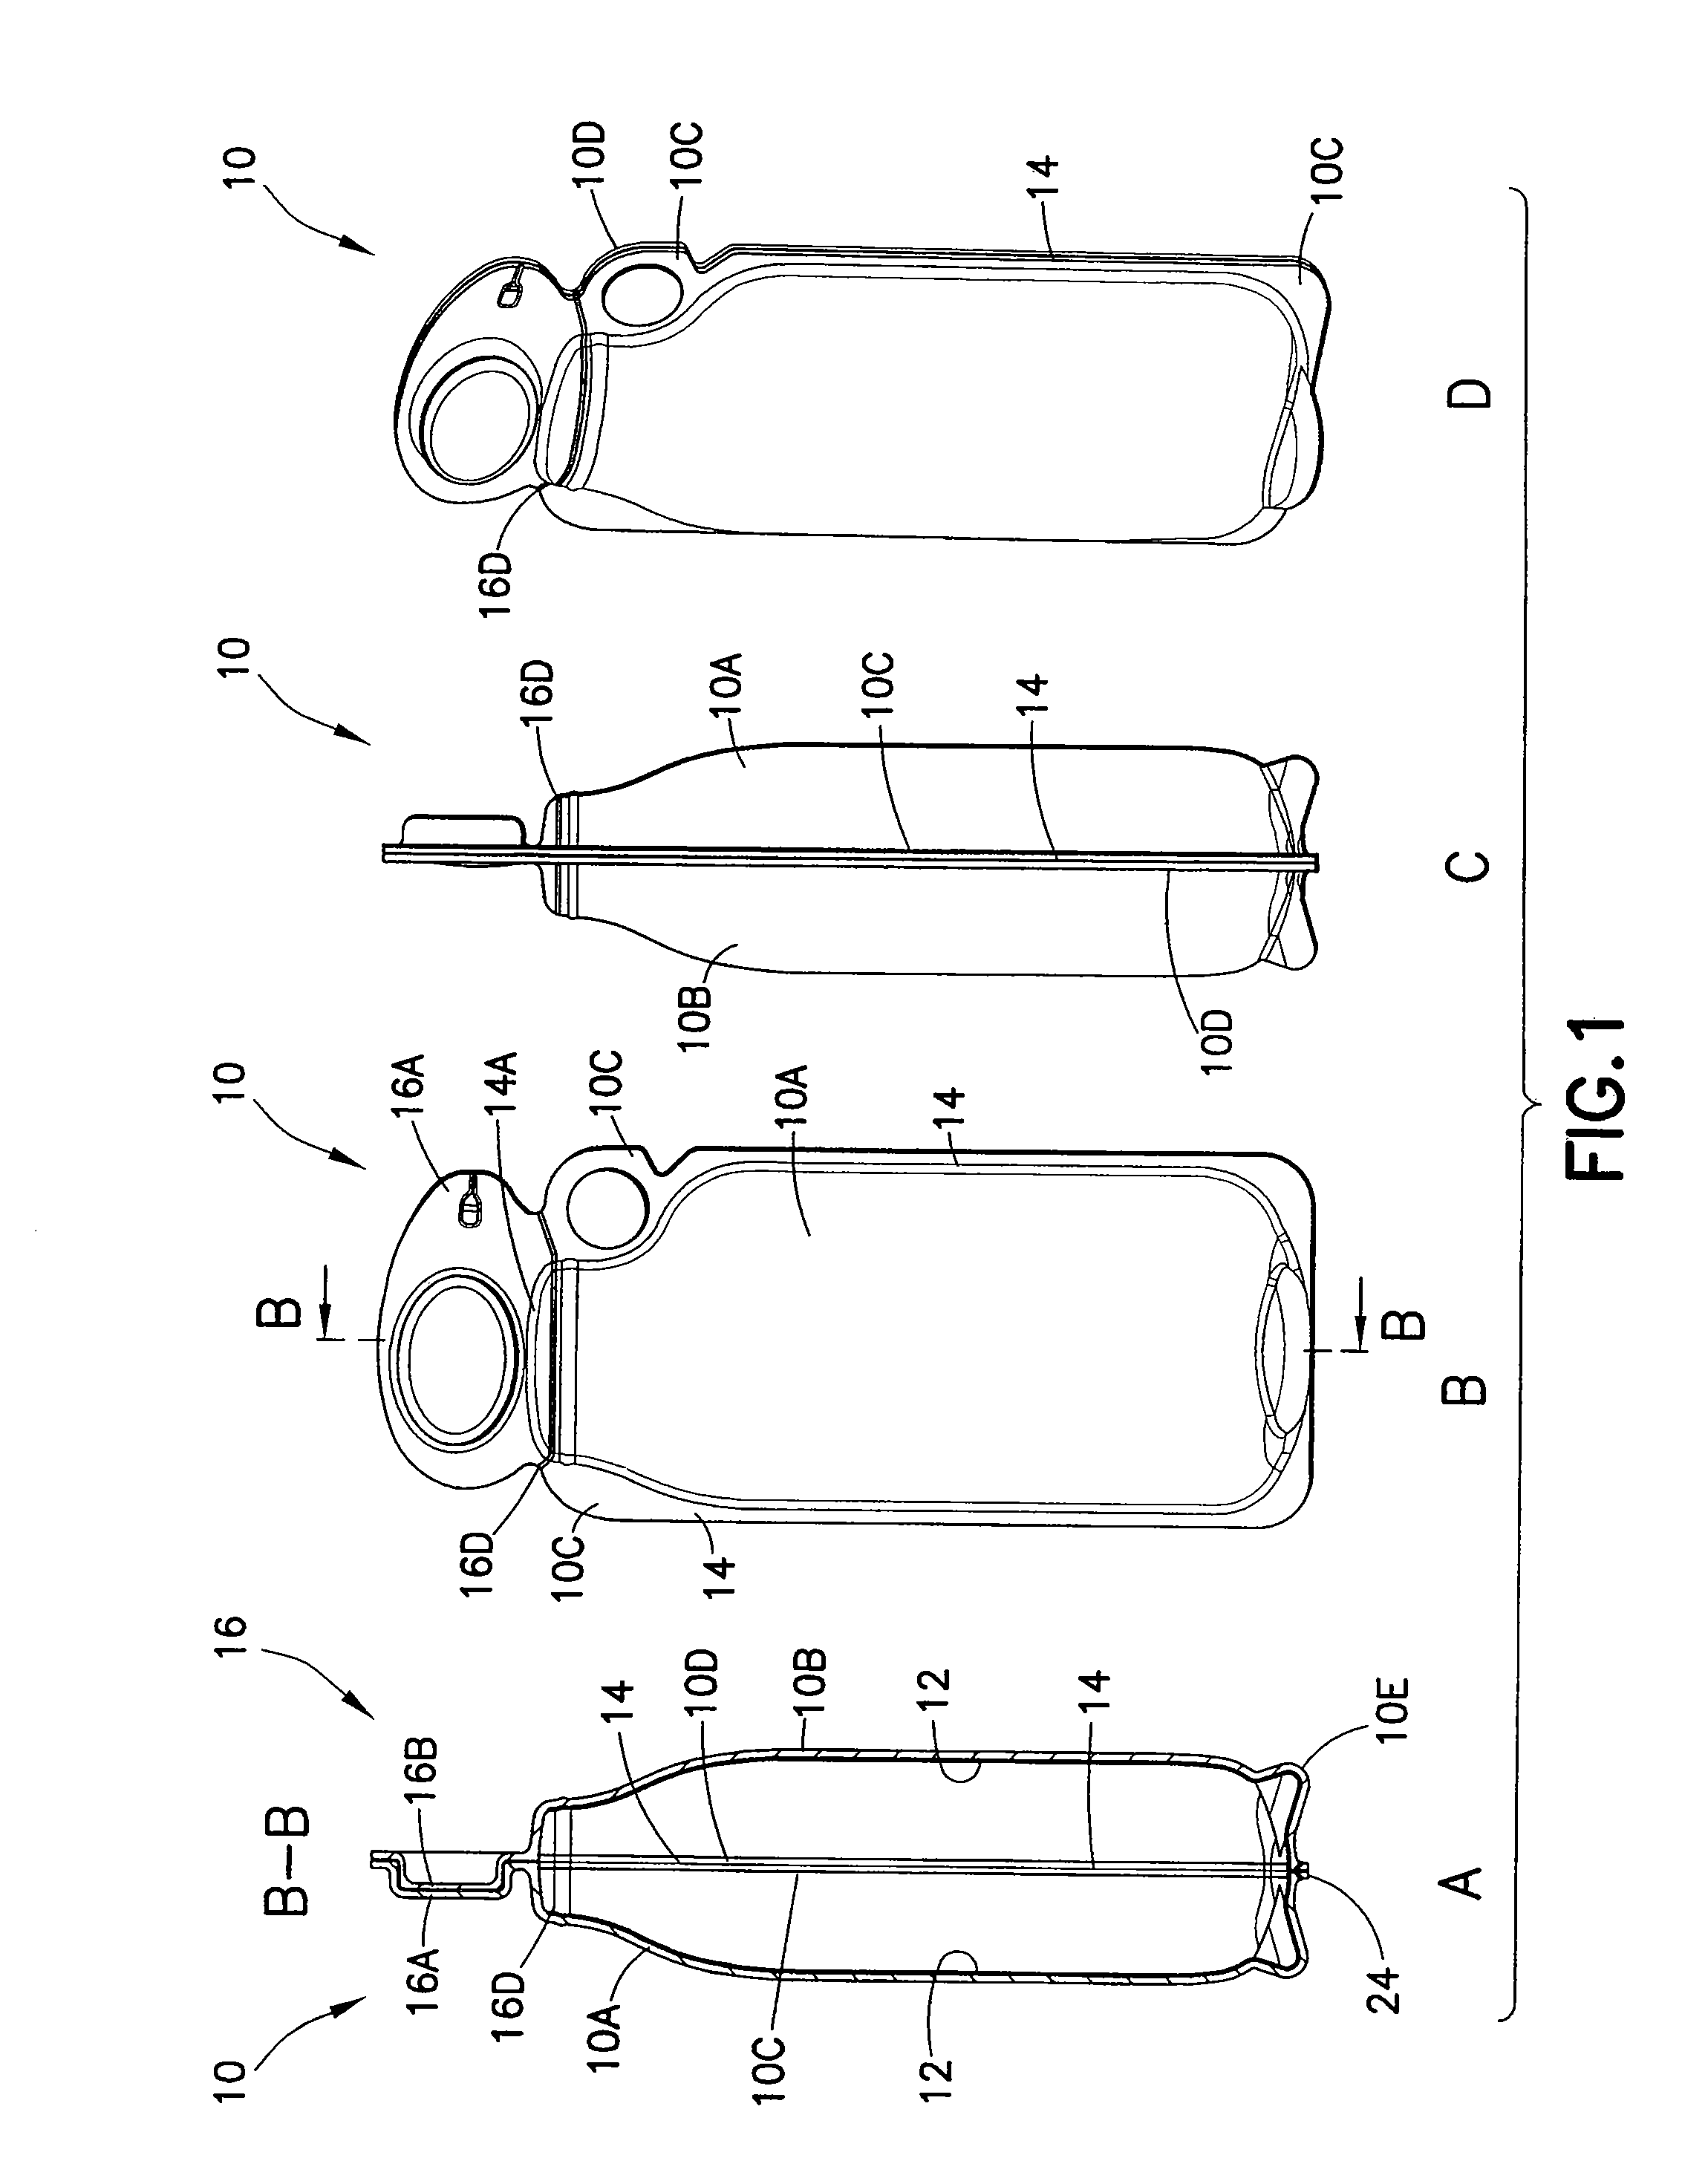 Environmentally friendly liquid container and method of manufacture